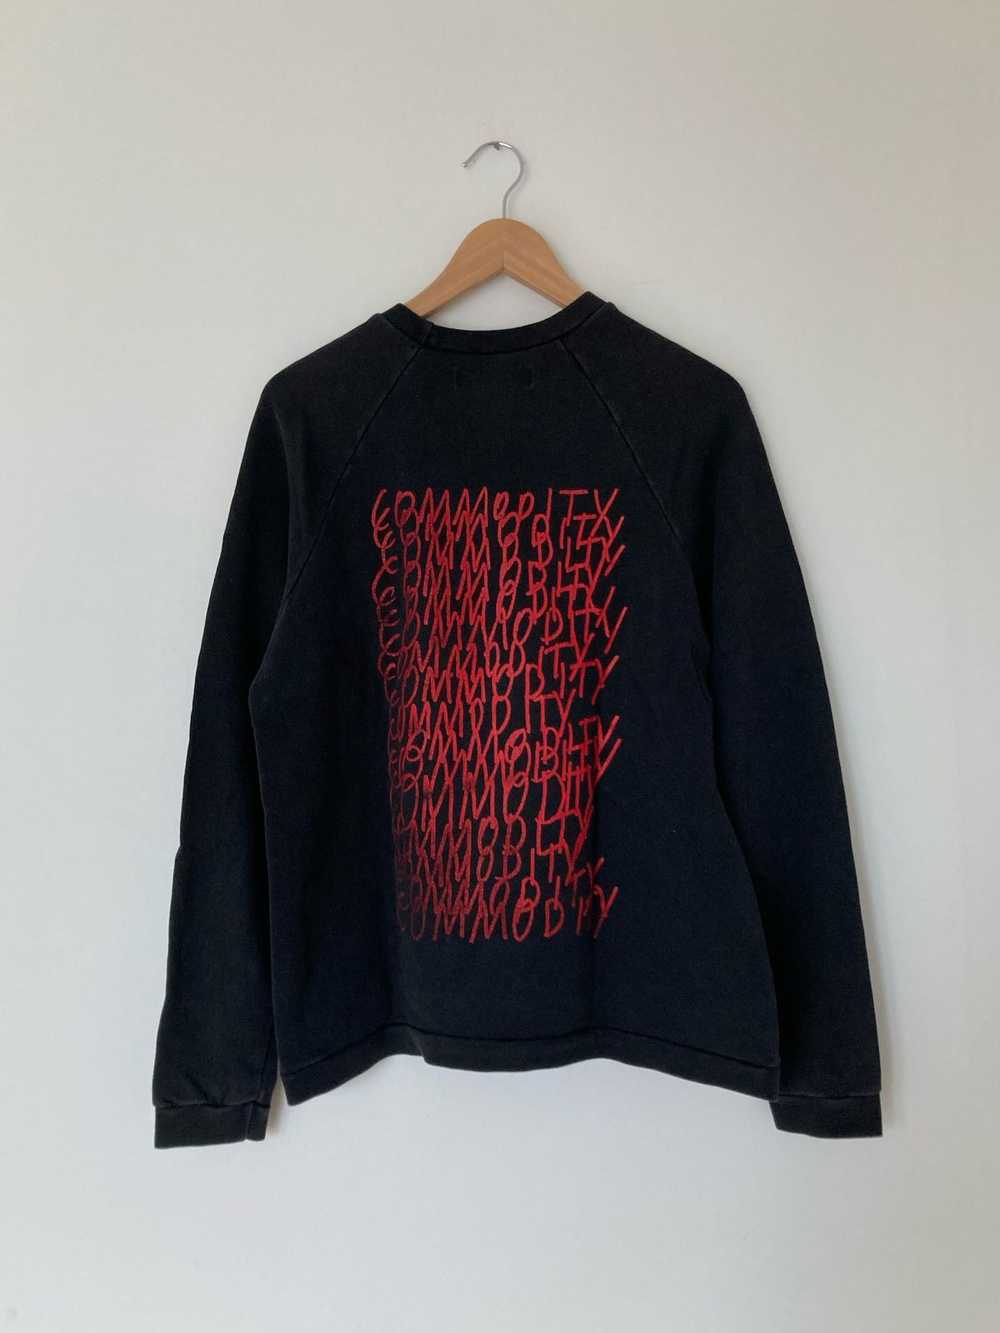 Raf Simons Raf SS03 Consumed "Commodity" sweater - image 1